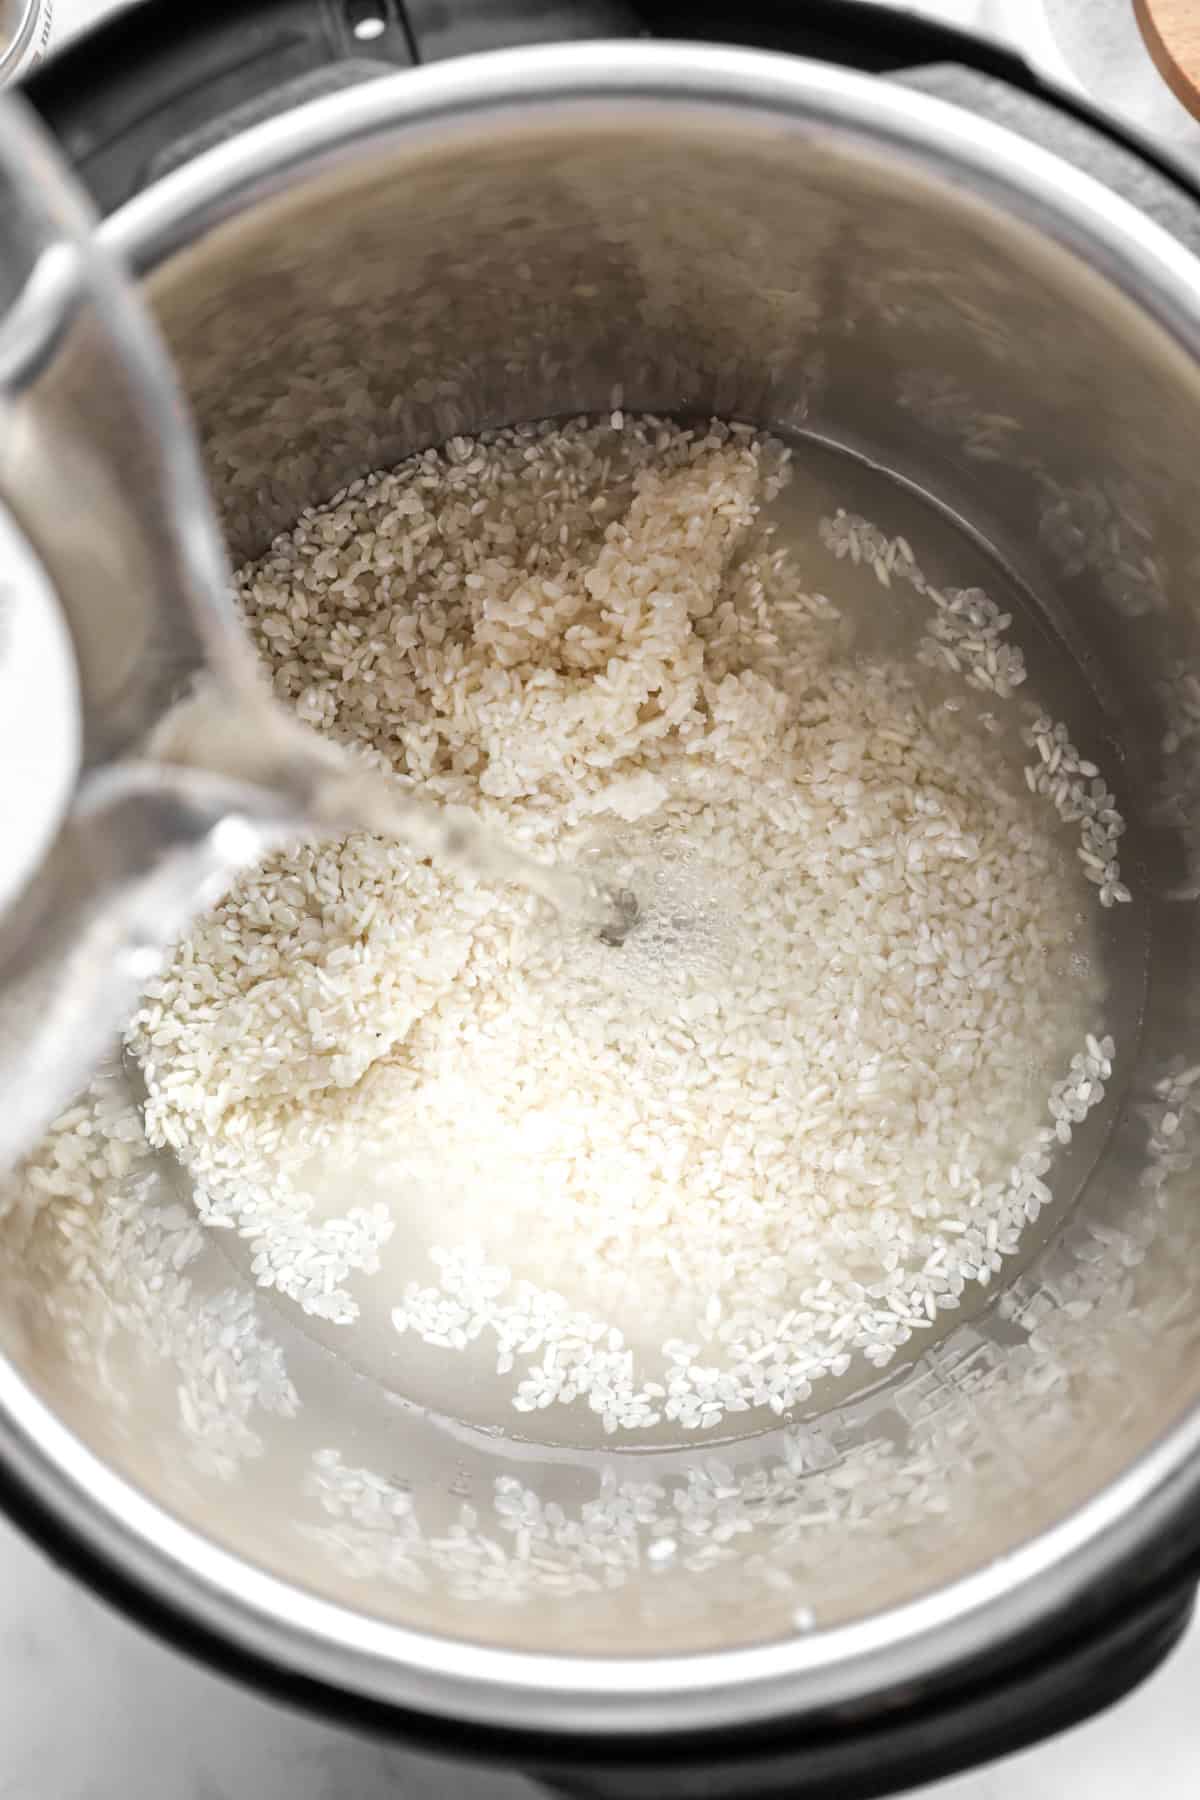 water being poured over rice in the instant pot.